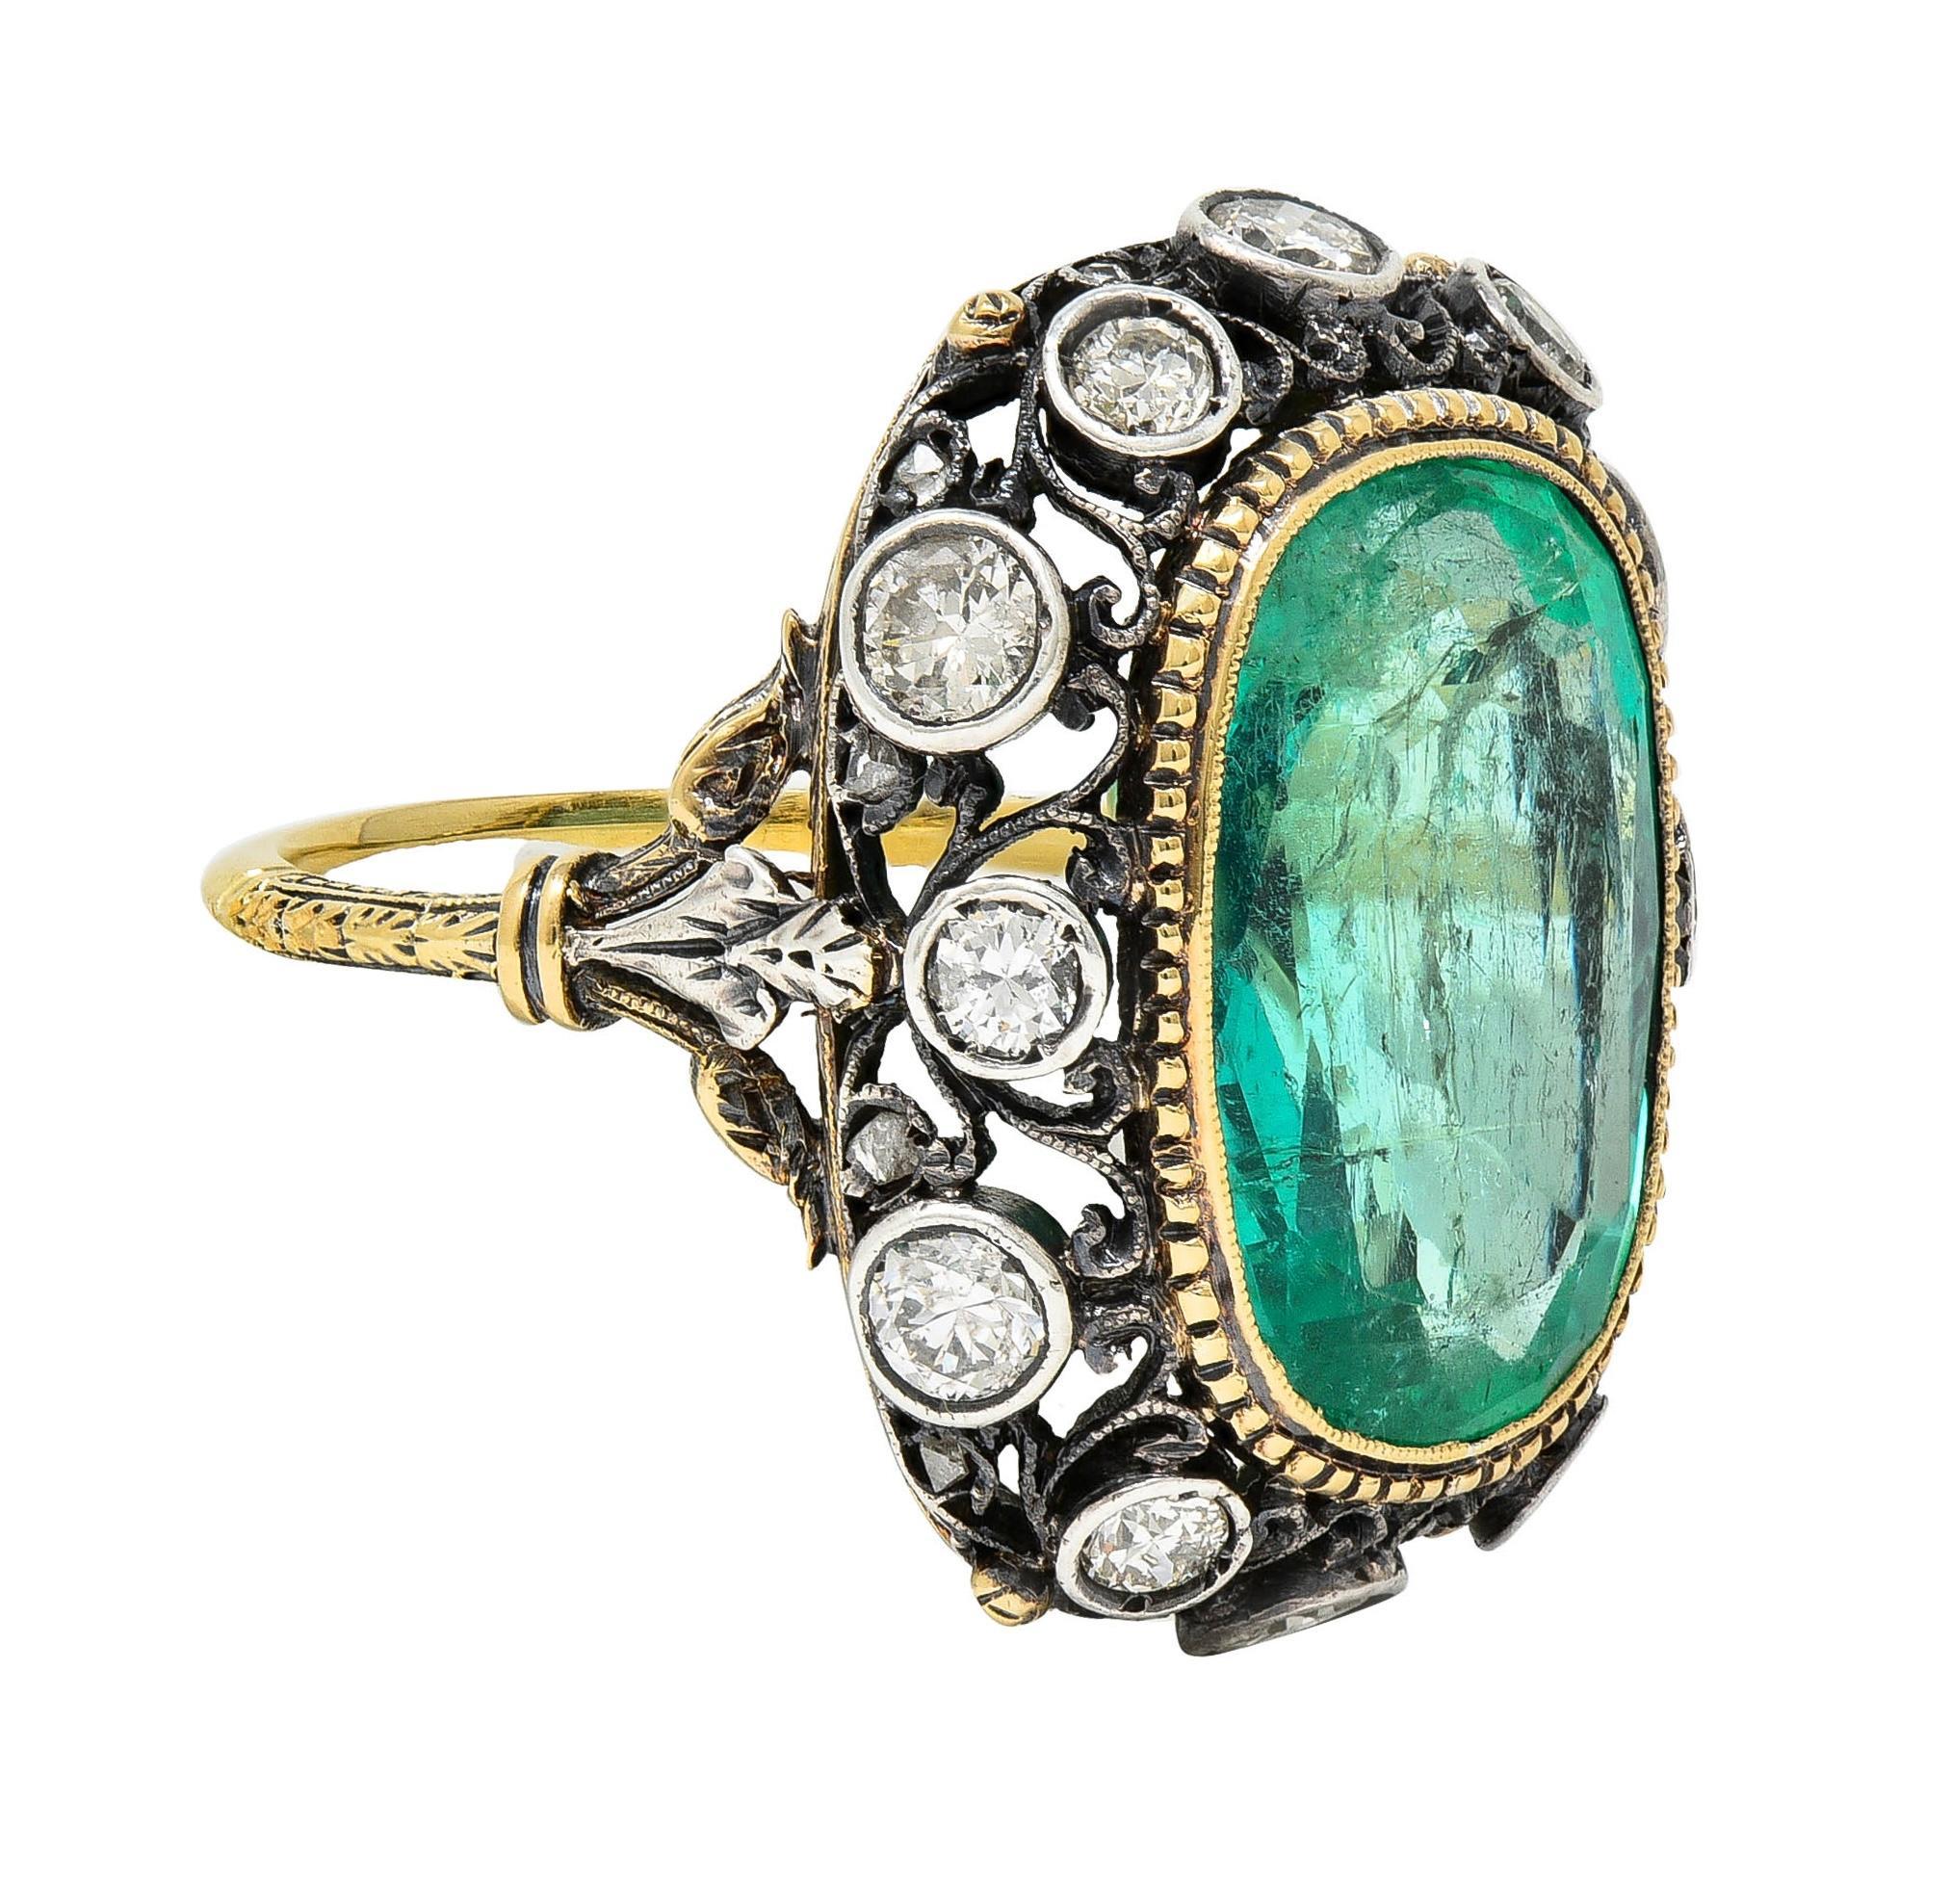 Centering an elongated cushion cut emerald weighing 7.10 carats total - transparent light green in color 
Natural Colombian in origin - set with a milgrain and groove detailed gold bezel 
With a domed sterling silver gallery surround with scroll